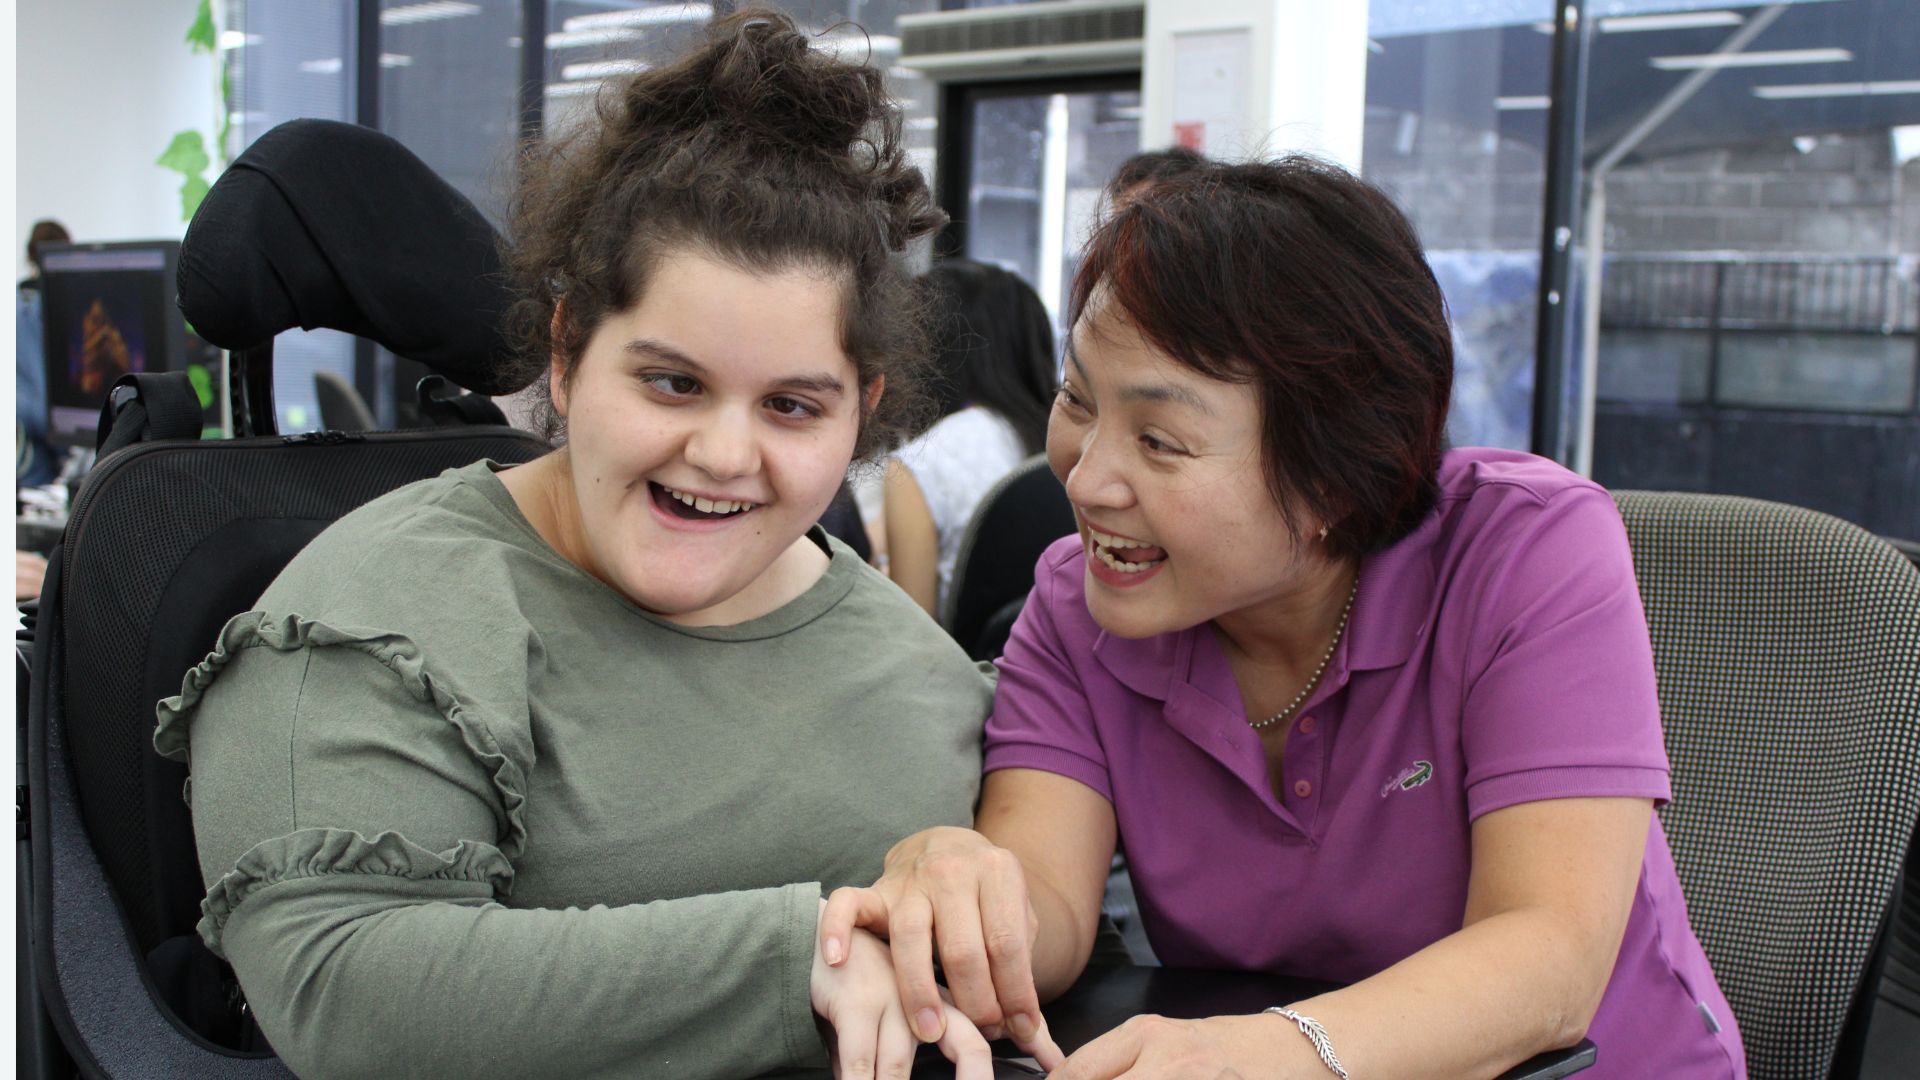 A lady with wavy dark hair and a khaki long sleeved tshirt is in a wheelchair smiling at the camera. Her support worker is holding her hand smiling at her; she has short black hair and is wearing a purple t shirt.